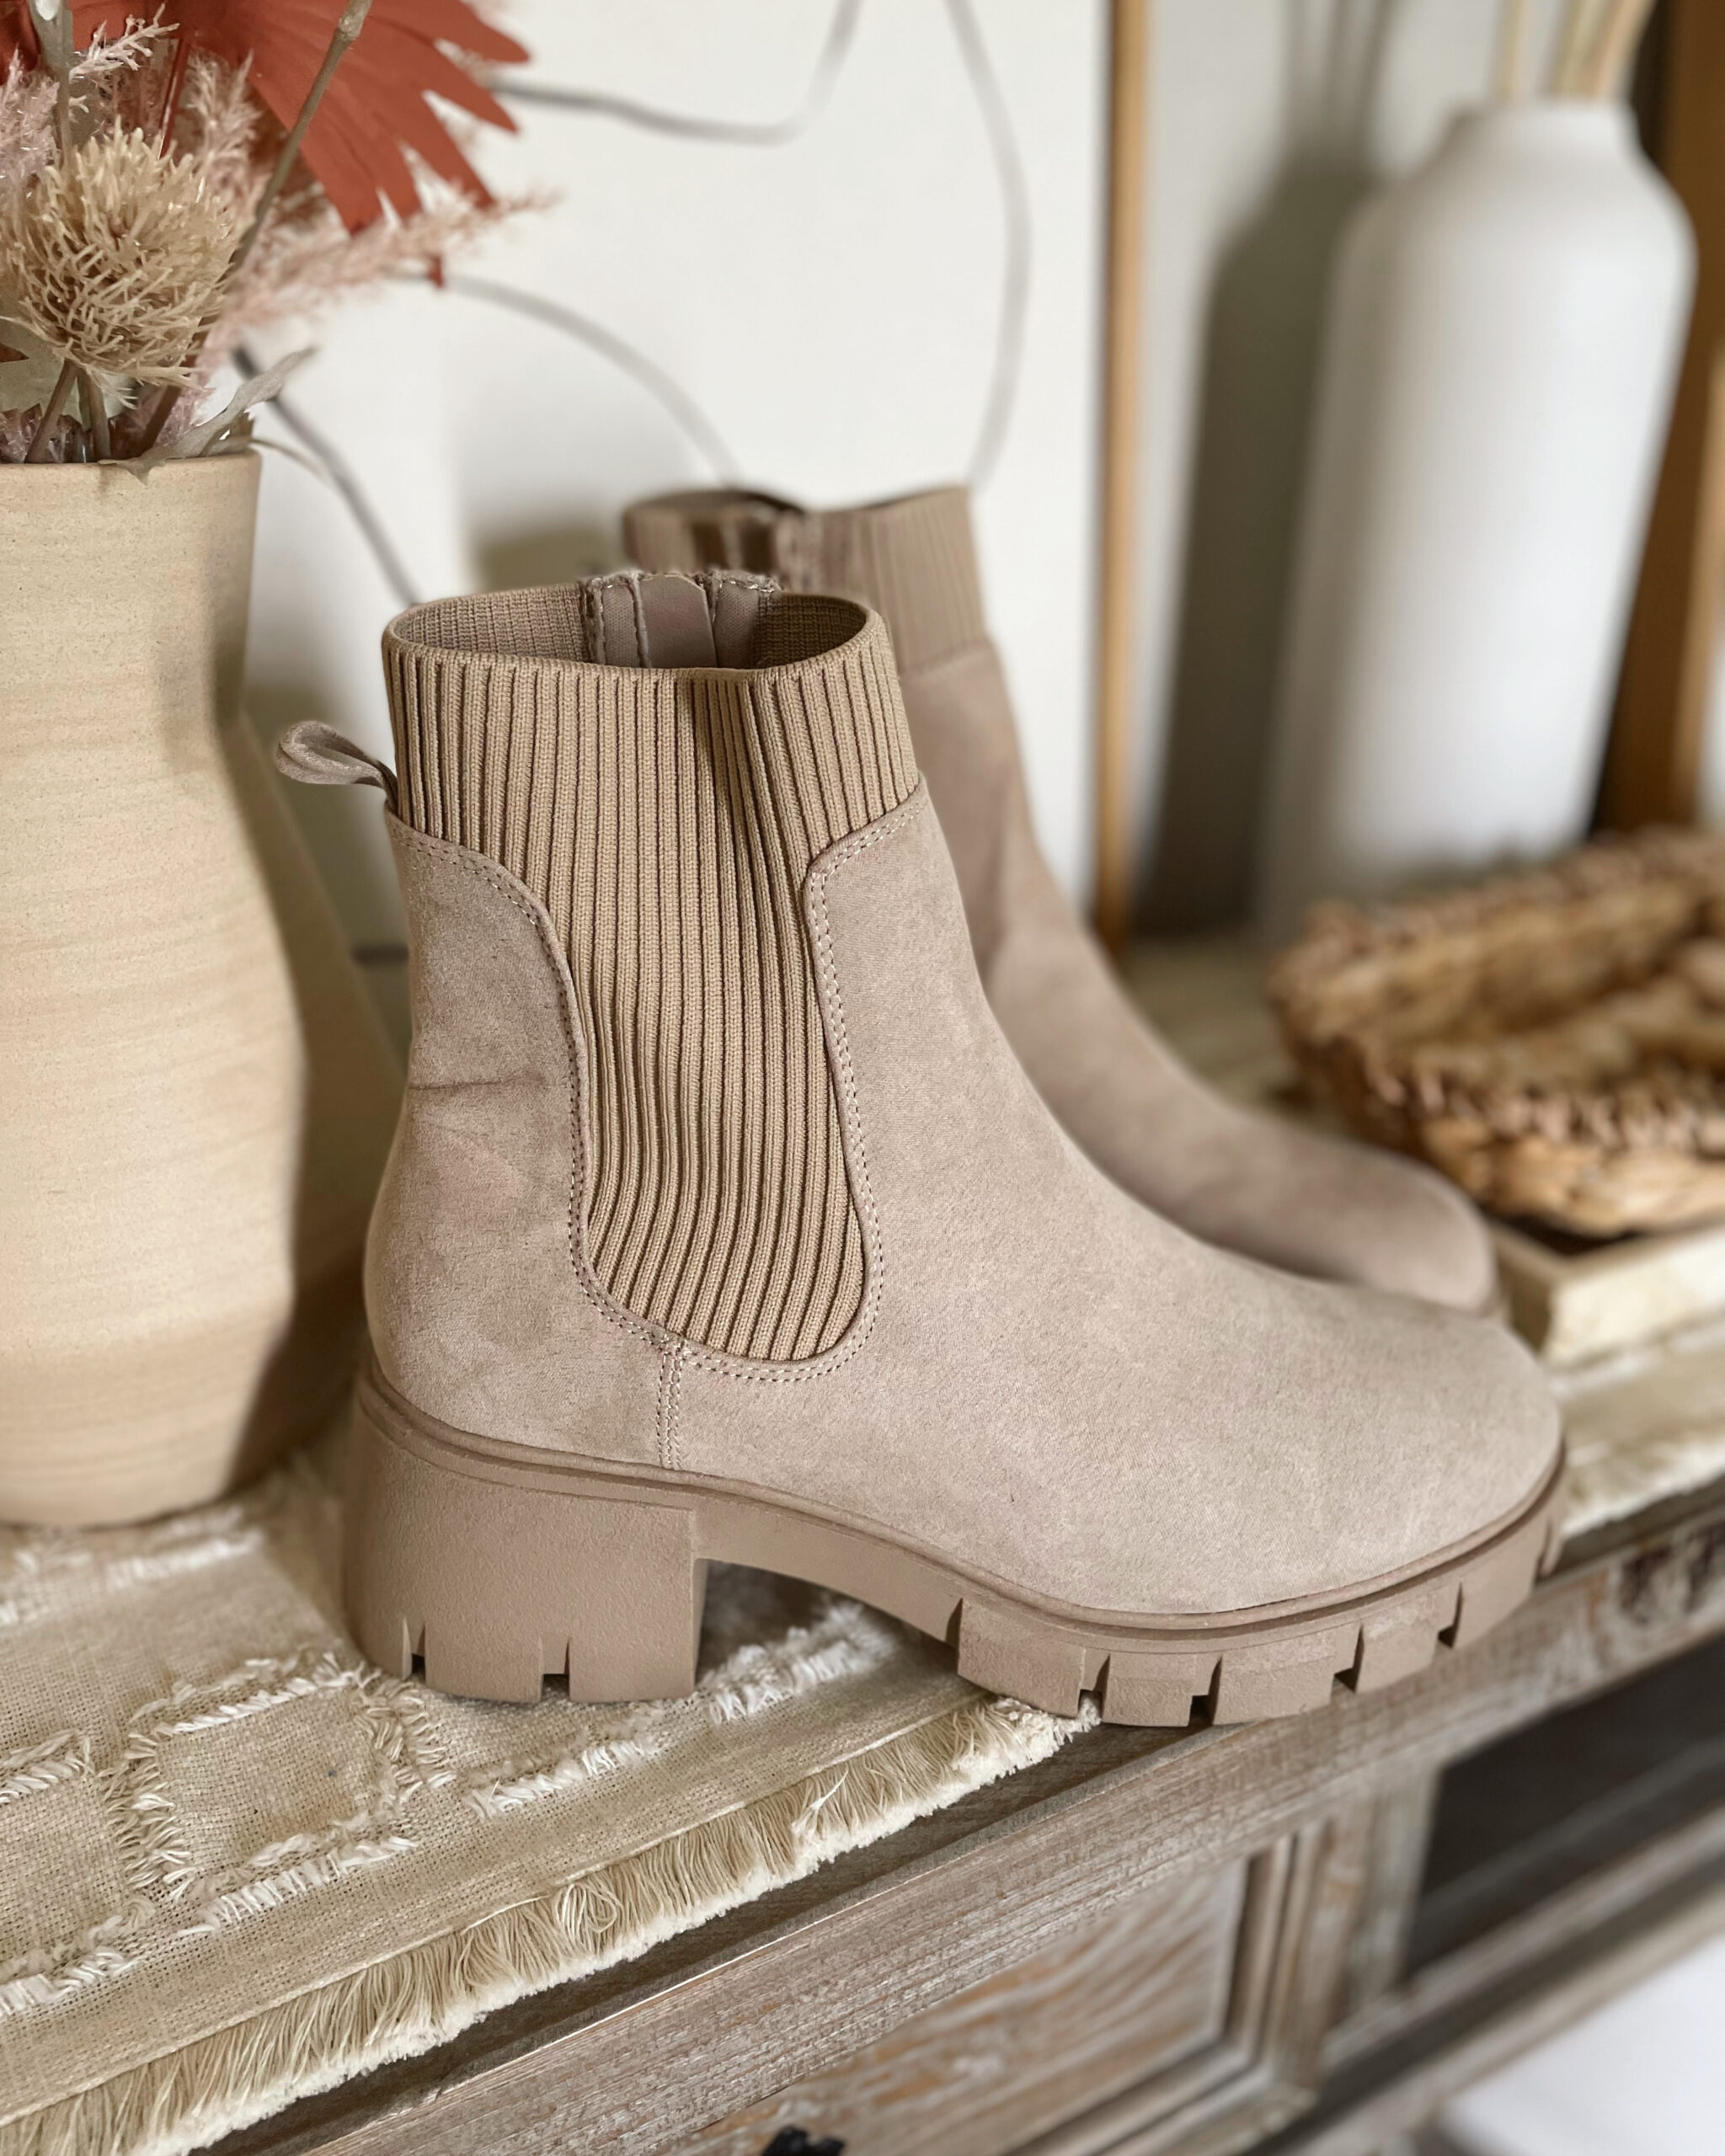 No Boundaries Women's Knit Chelsea - 5 Fall Shoe Trends to Wear This Season | Fall Shoes Trends for 2022